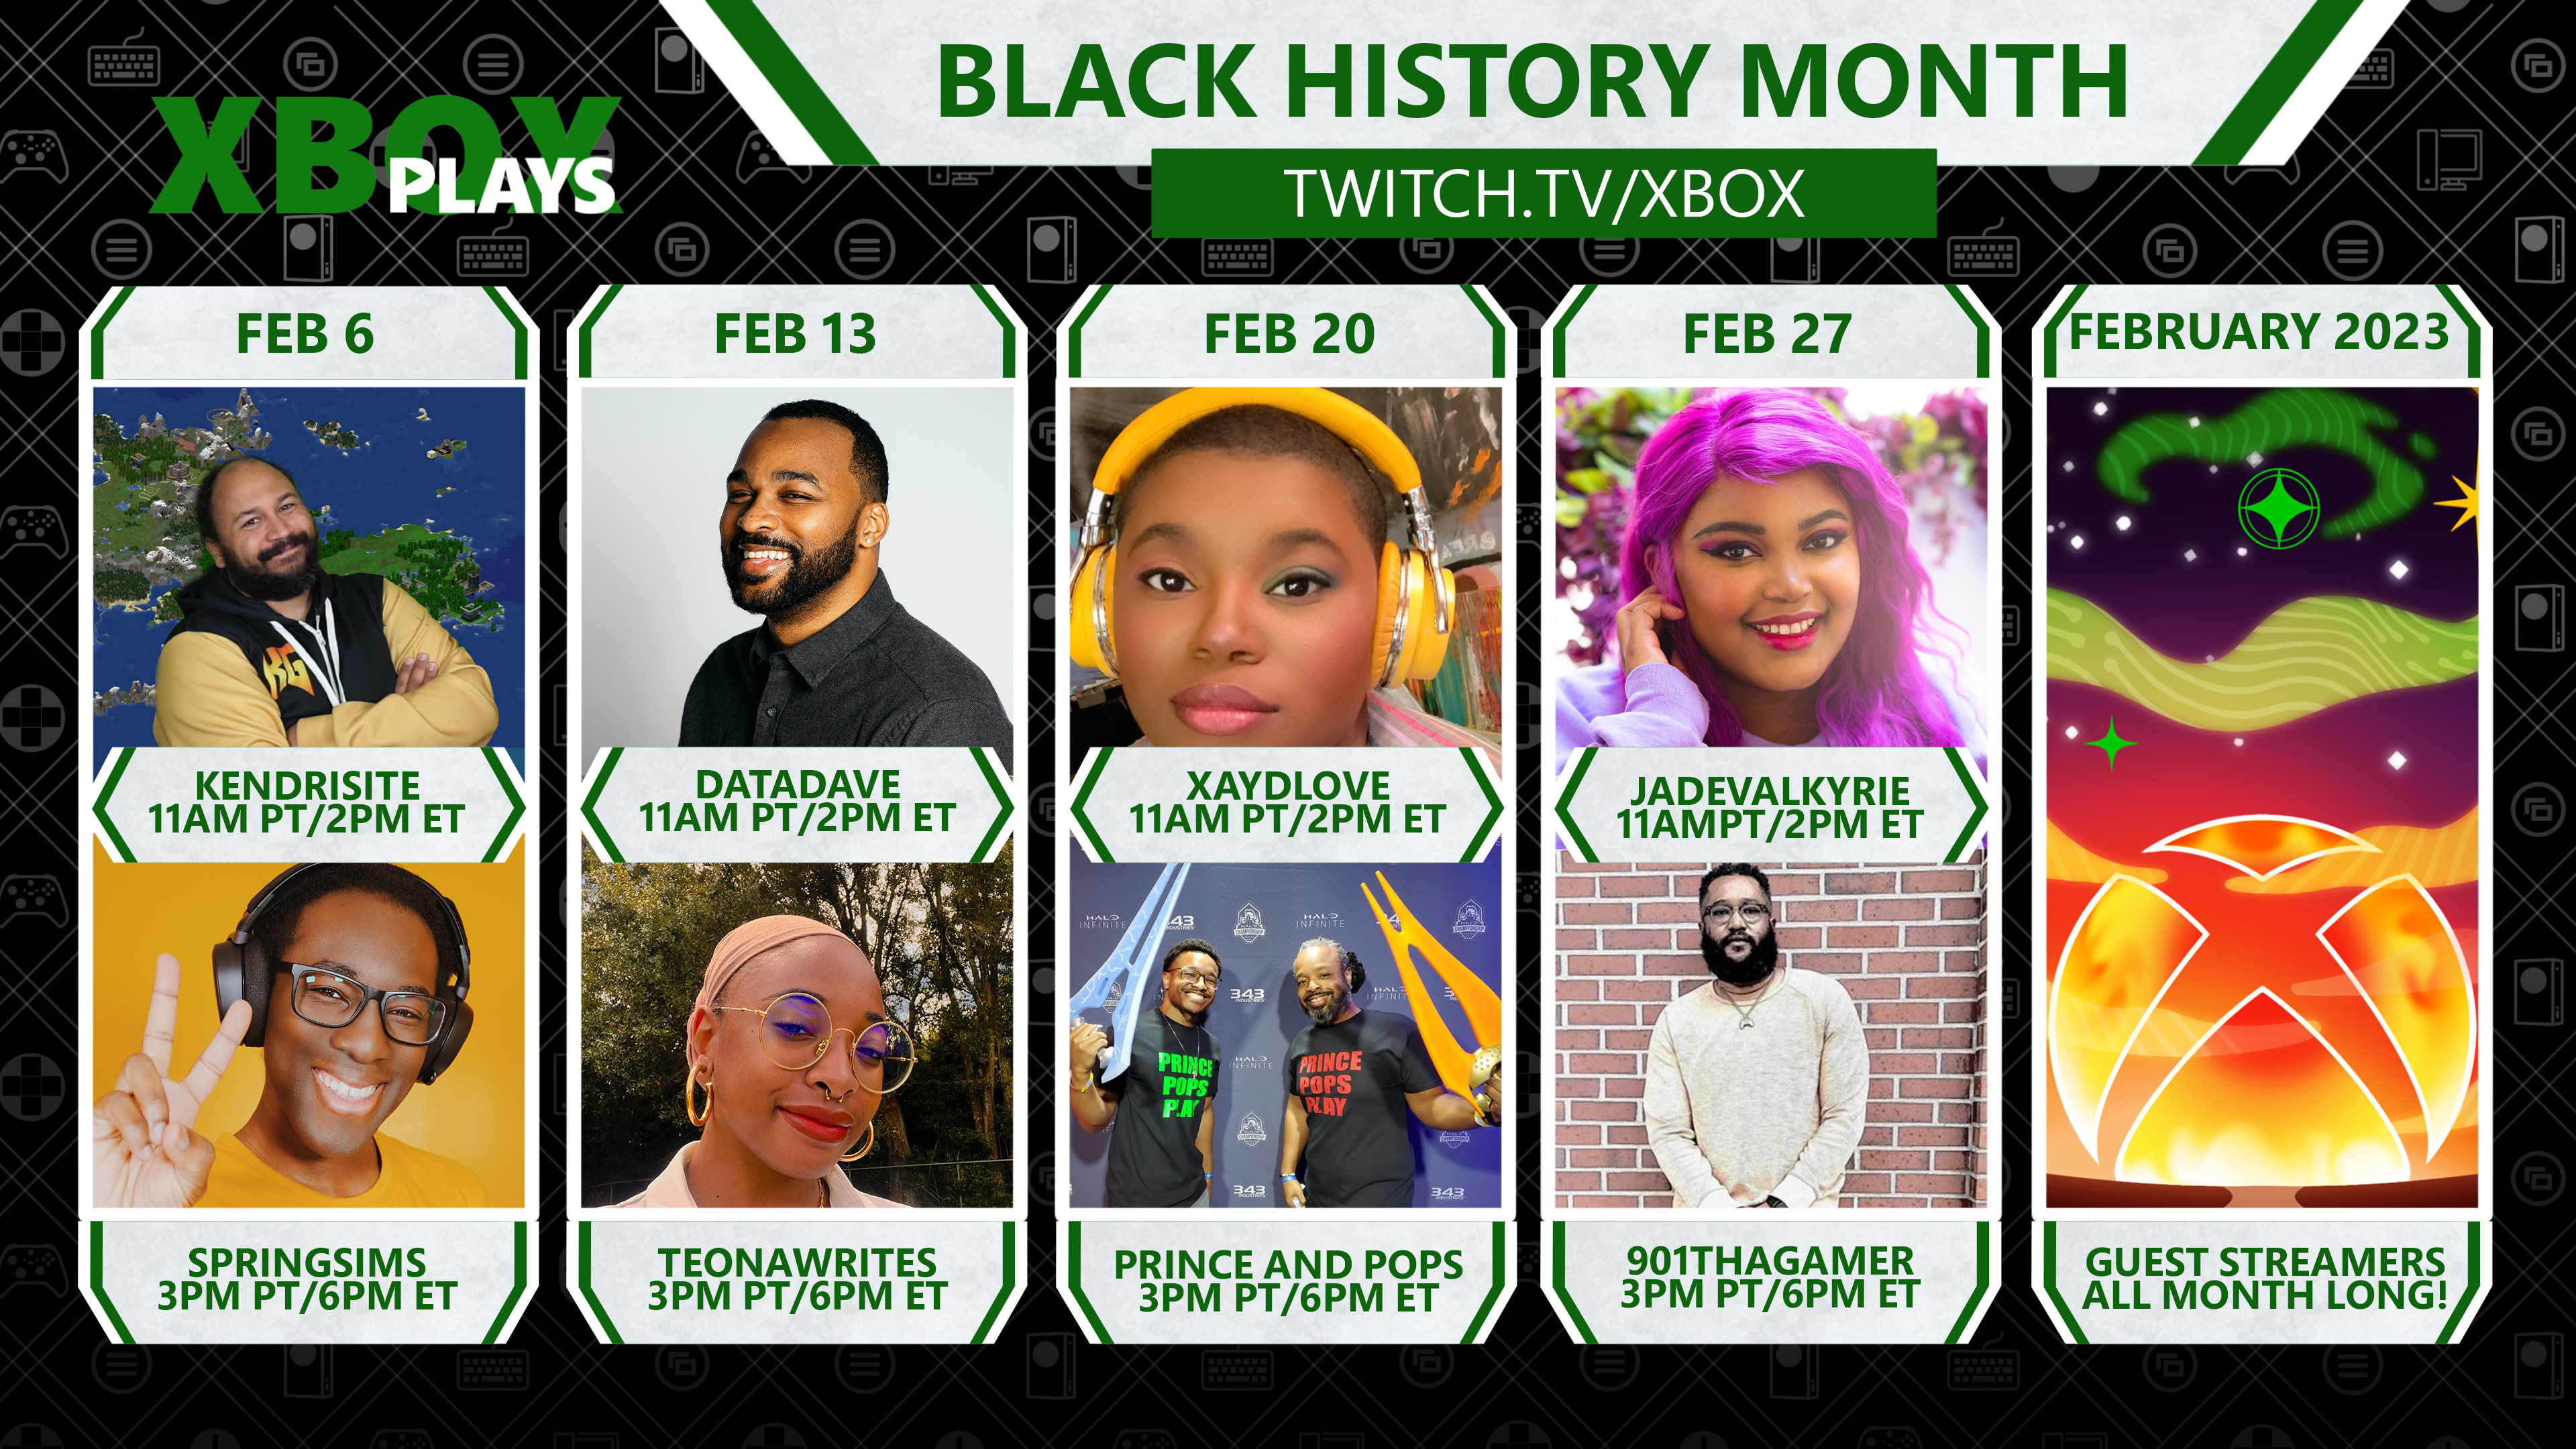 Xbox Plays celebrates Black History Month with streamer takeovers every Monday in February at twitch.tv/Xbox